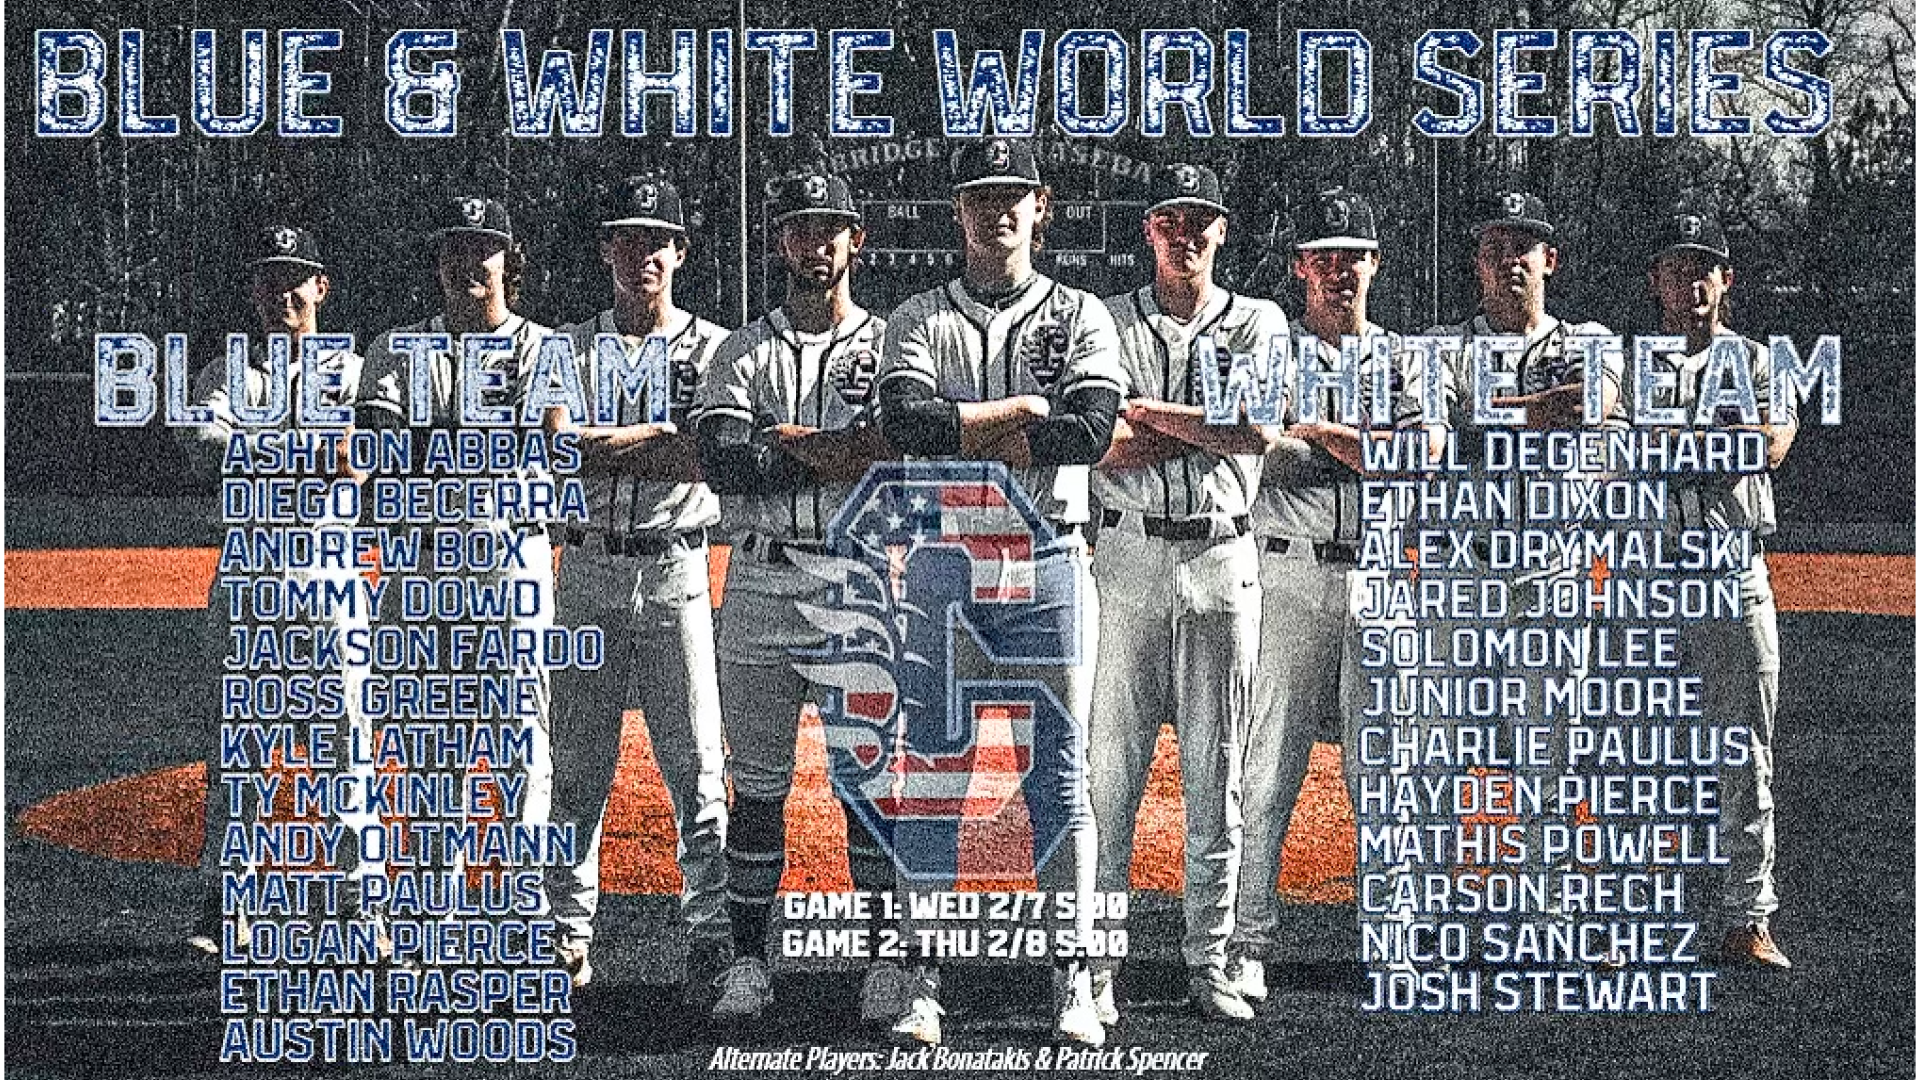 Blue and White World Series 2/7 and 2/8